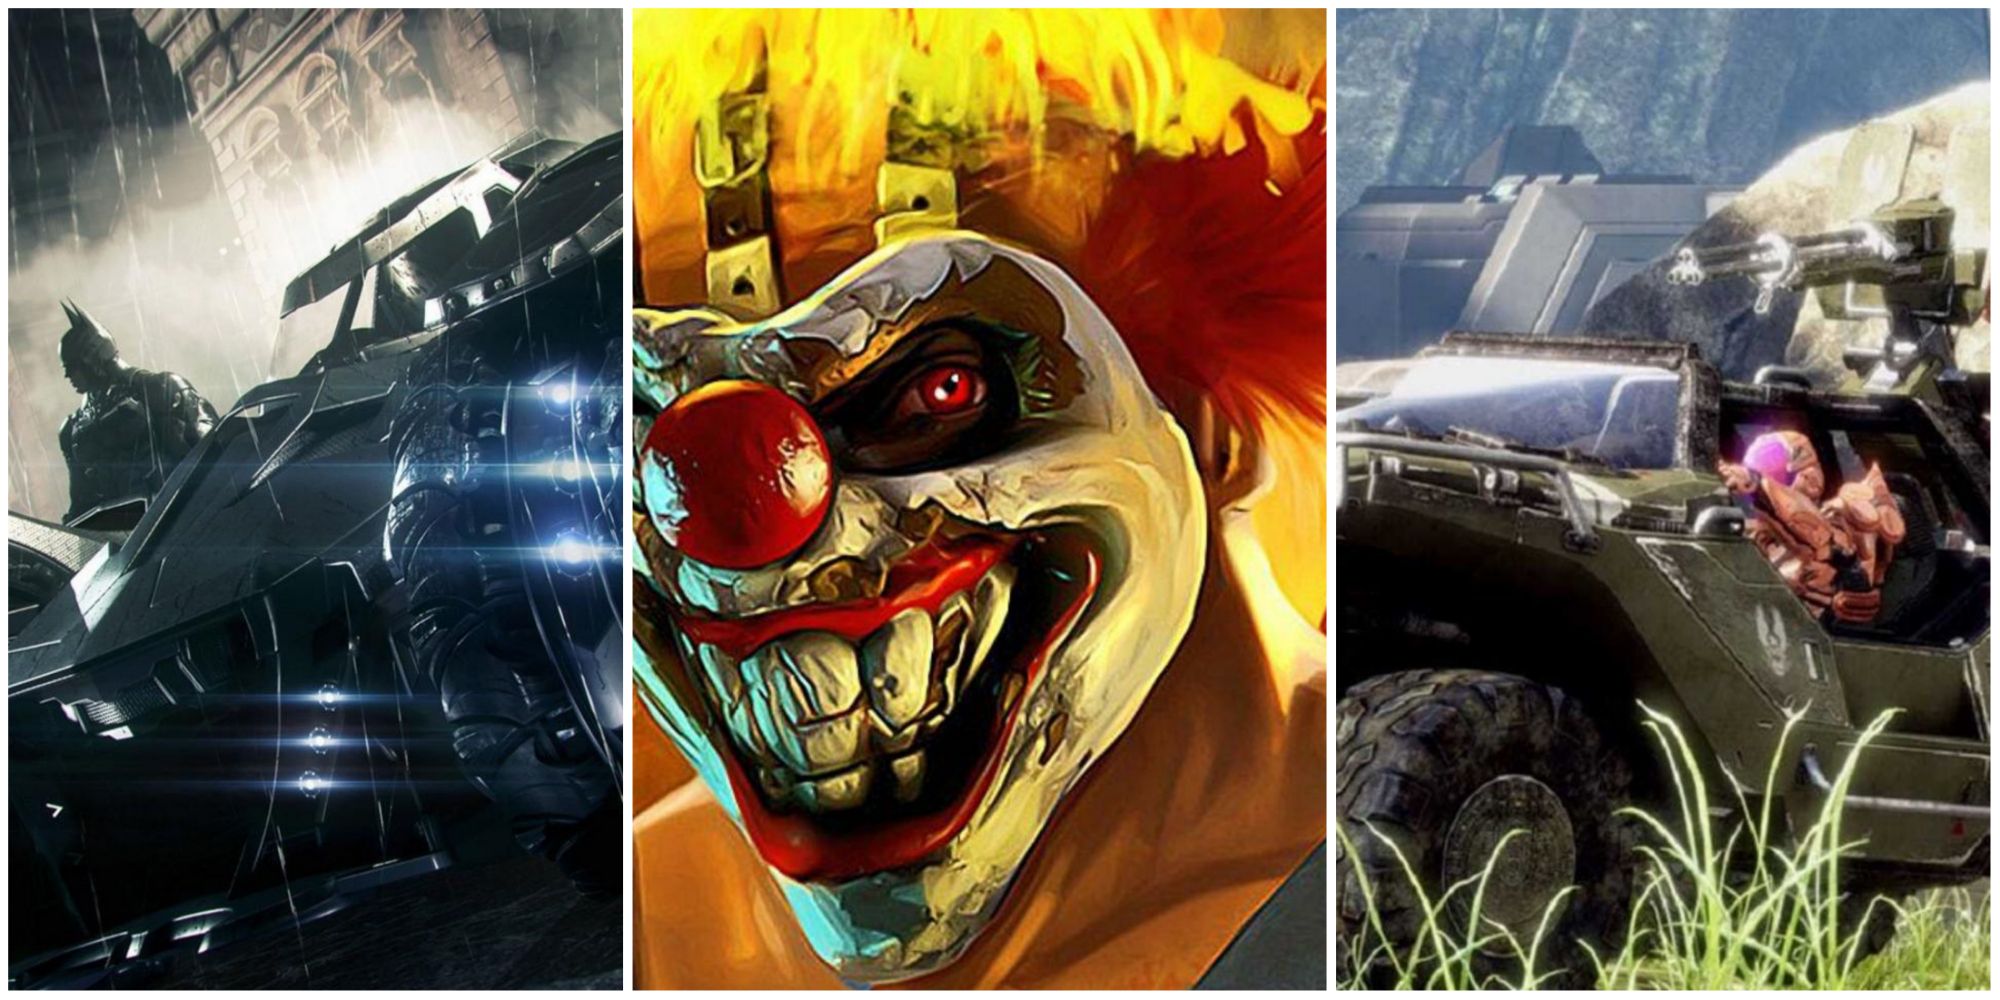 Batman standing by the batmobile in Arkham Knight, a close-up of Sweet Tooth from Twisted Metal, and players in a Warthog from Halo Infinite, left to right